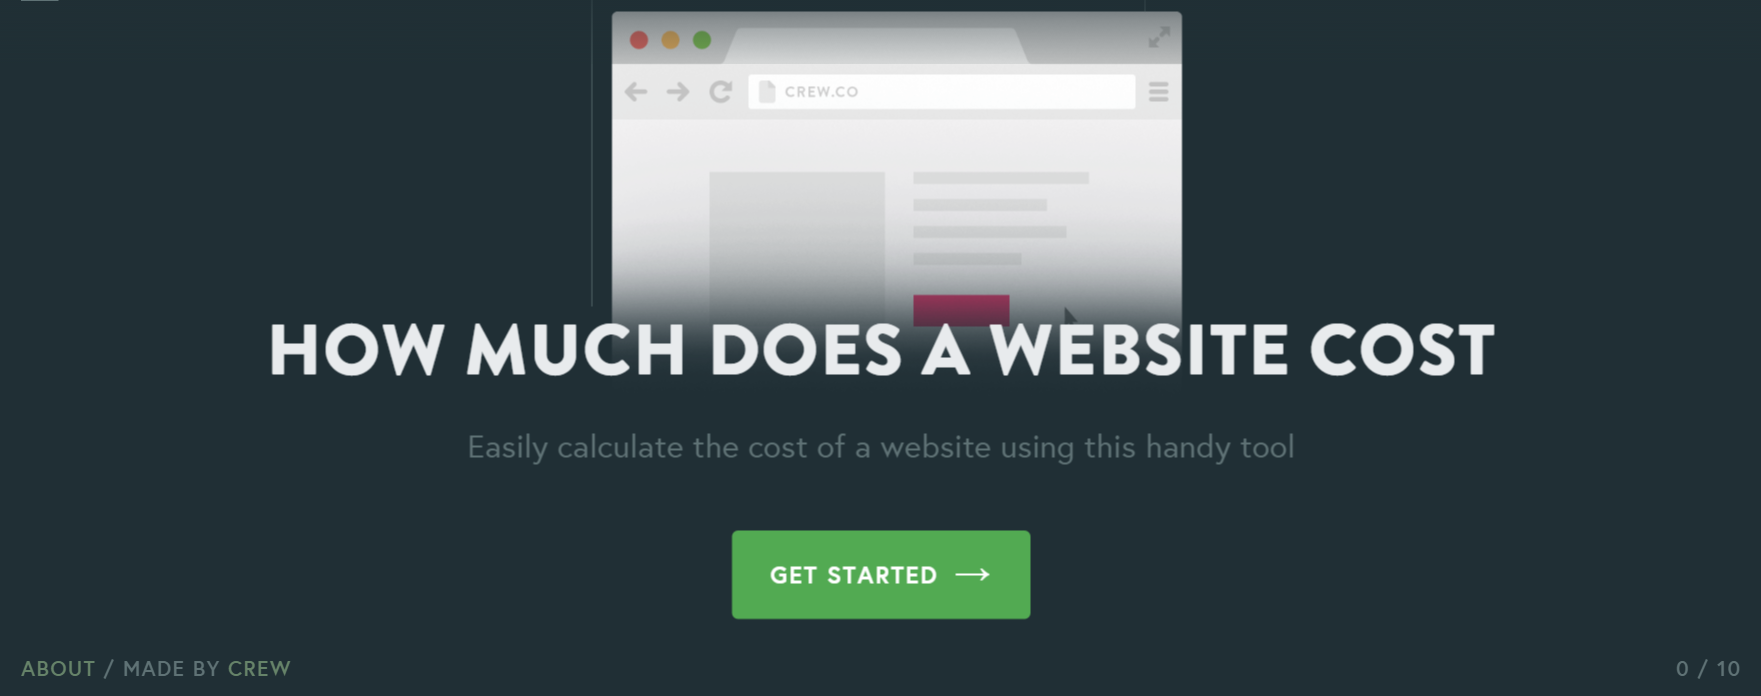 How Much does a website cost